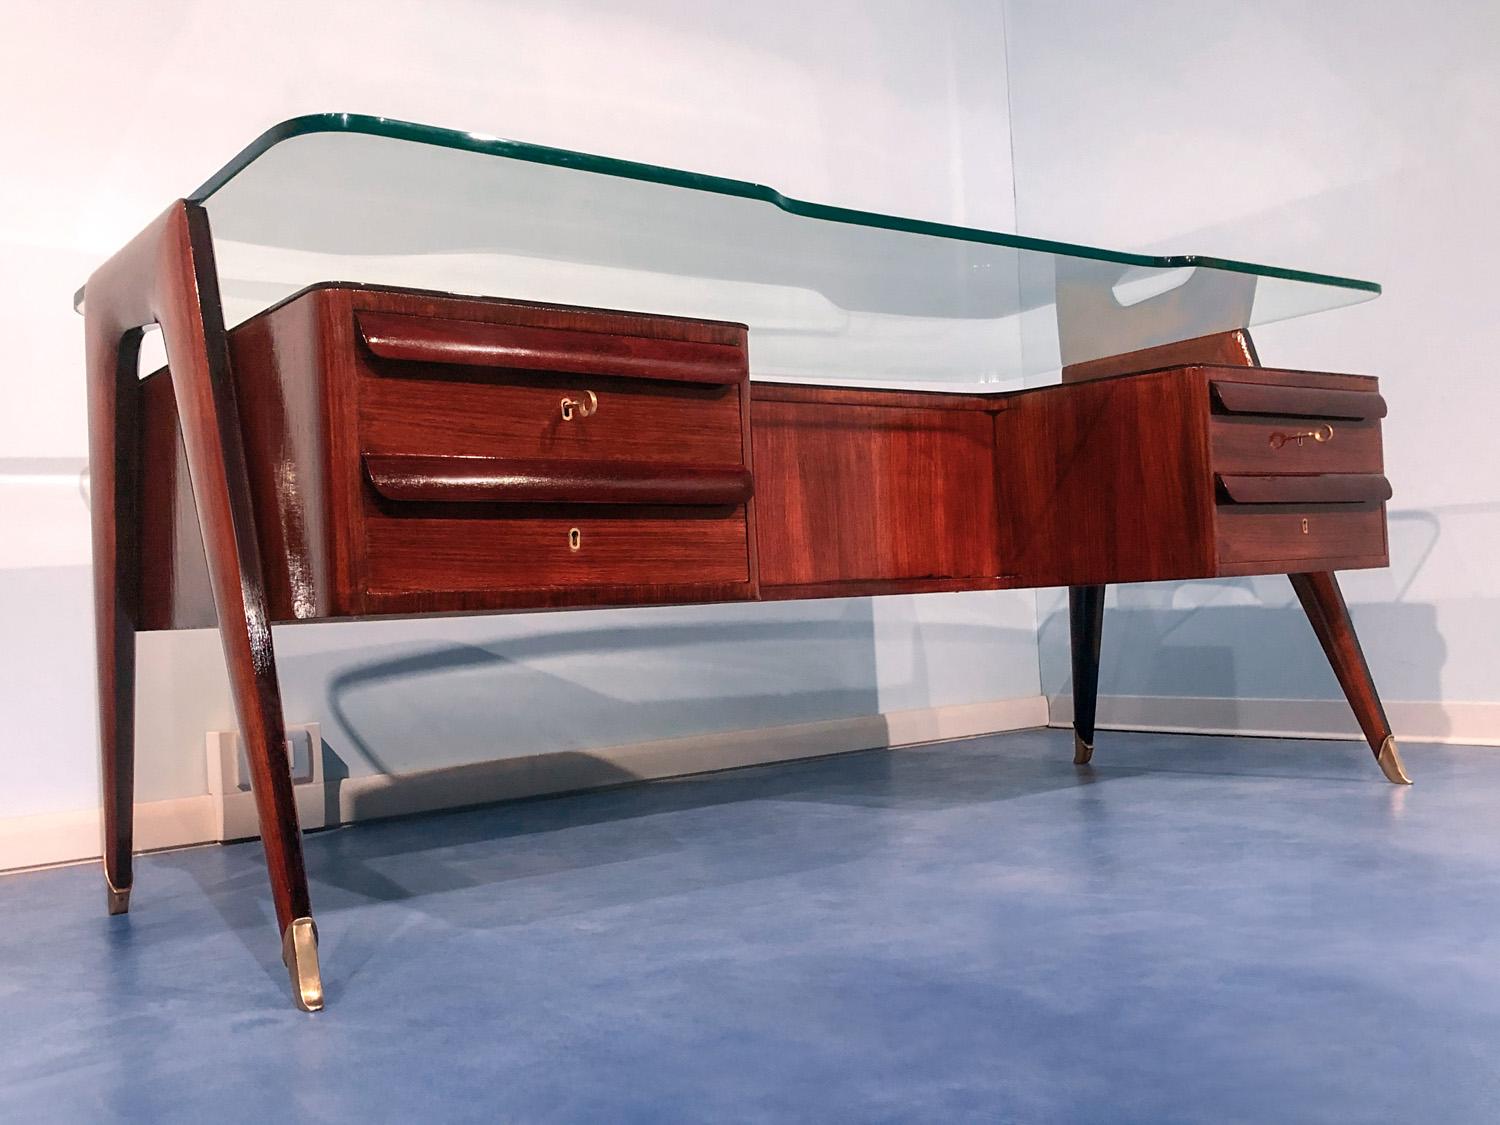 This stunning and impressive Italian executive desk is one of the masterpieces of the Italian designer Vittorio Dassi, a model type produced in Italy in the 1950s and specifically dedicated to an audience formed by professionals and senior